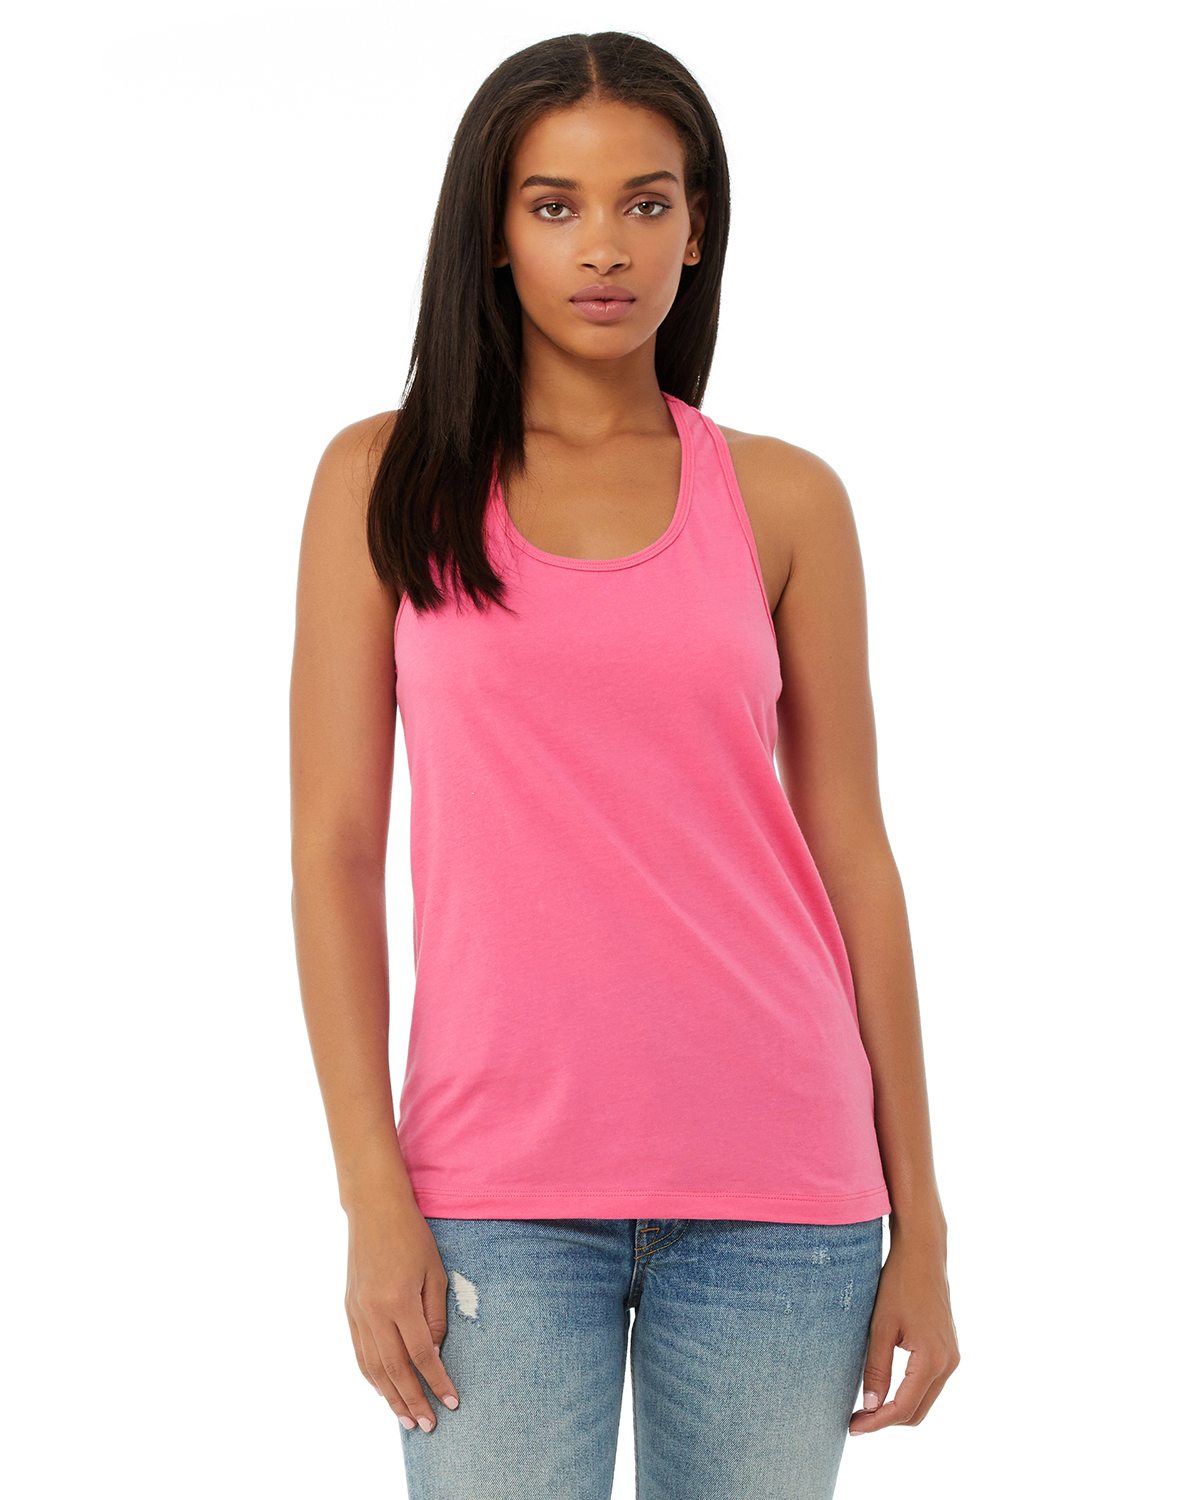 The North Face Pink Heather Racerback Tank Top Built In Bra Size Medium